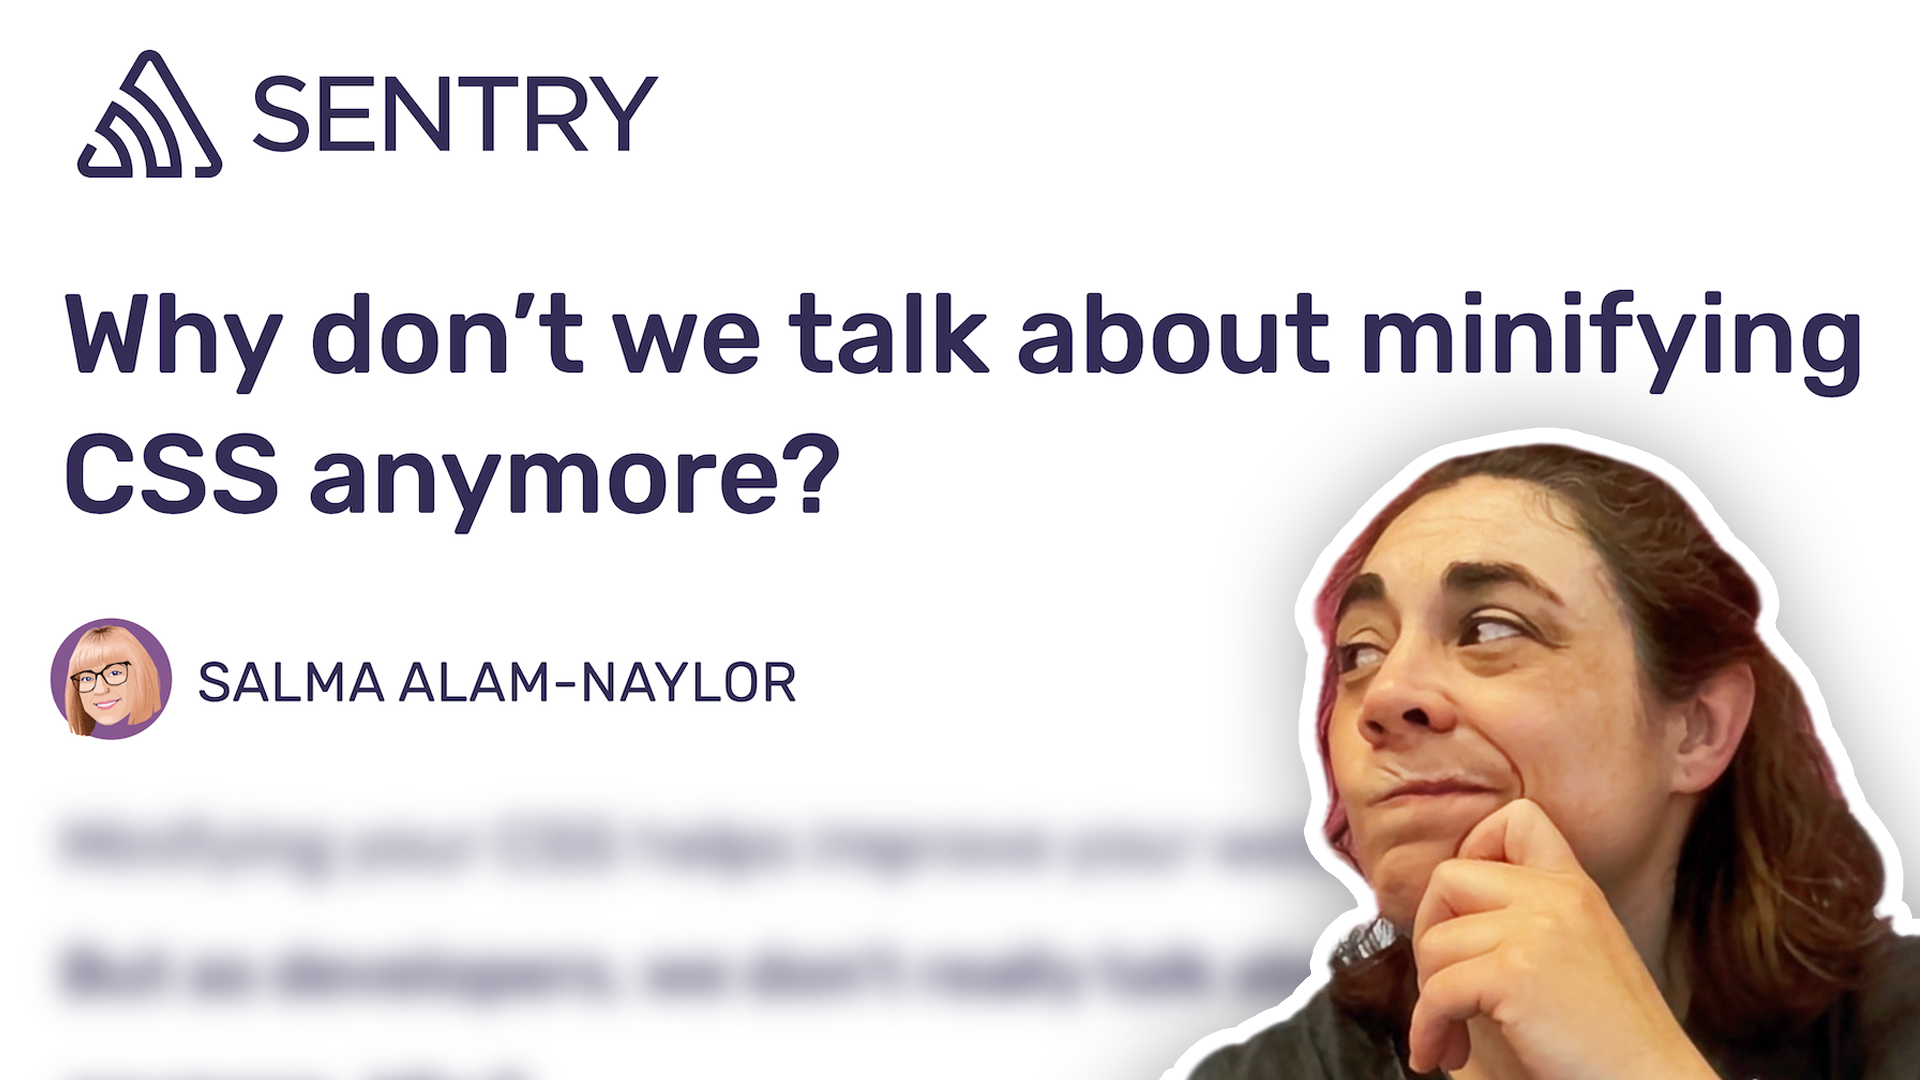 Sarah makes a curious face at the title why don't we talk about minifying CSS anymore?